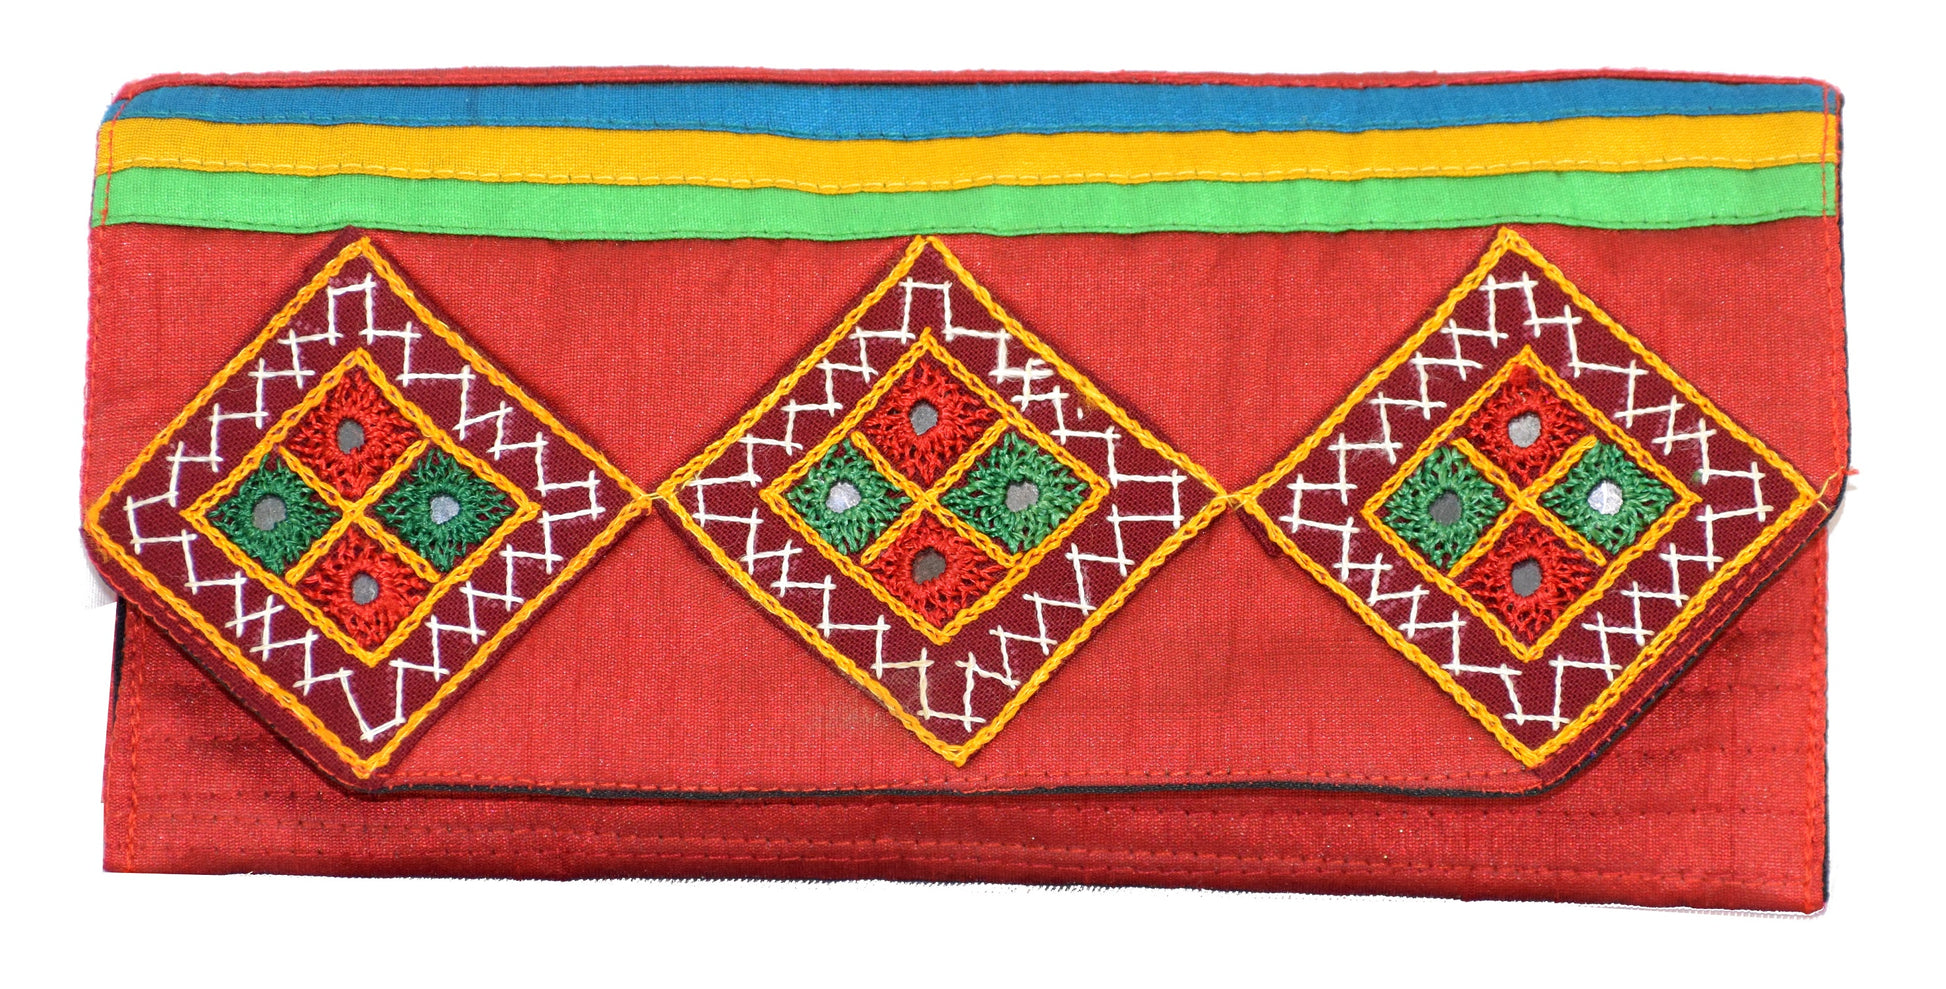 Aahir Embroidery Raw Silk Three Patch Wallet